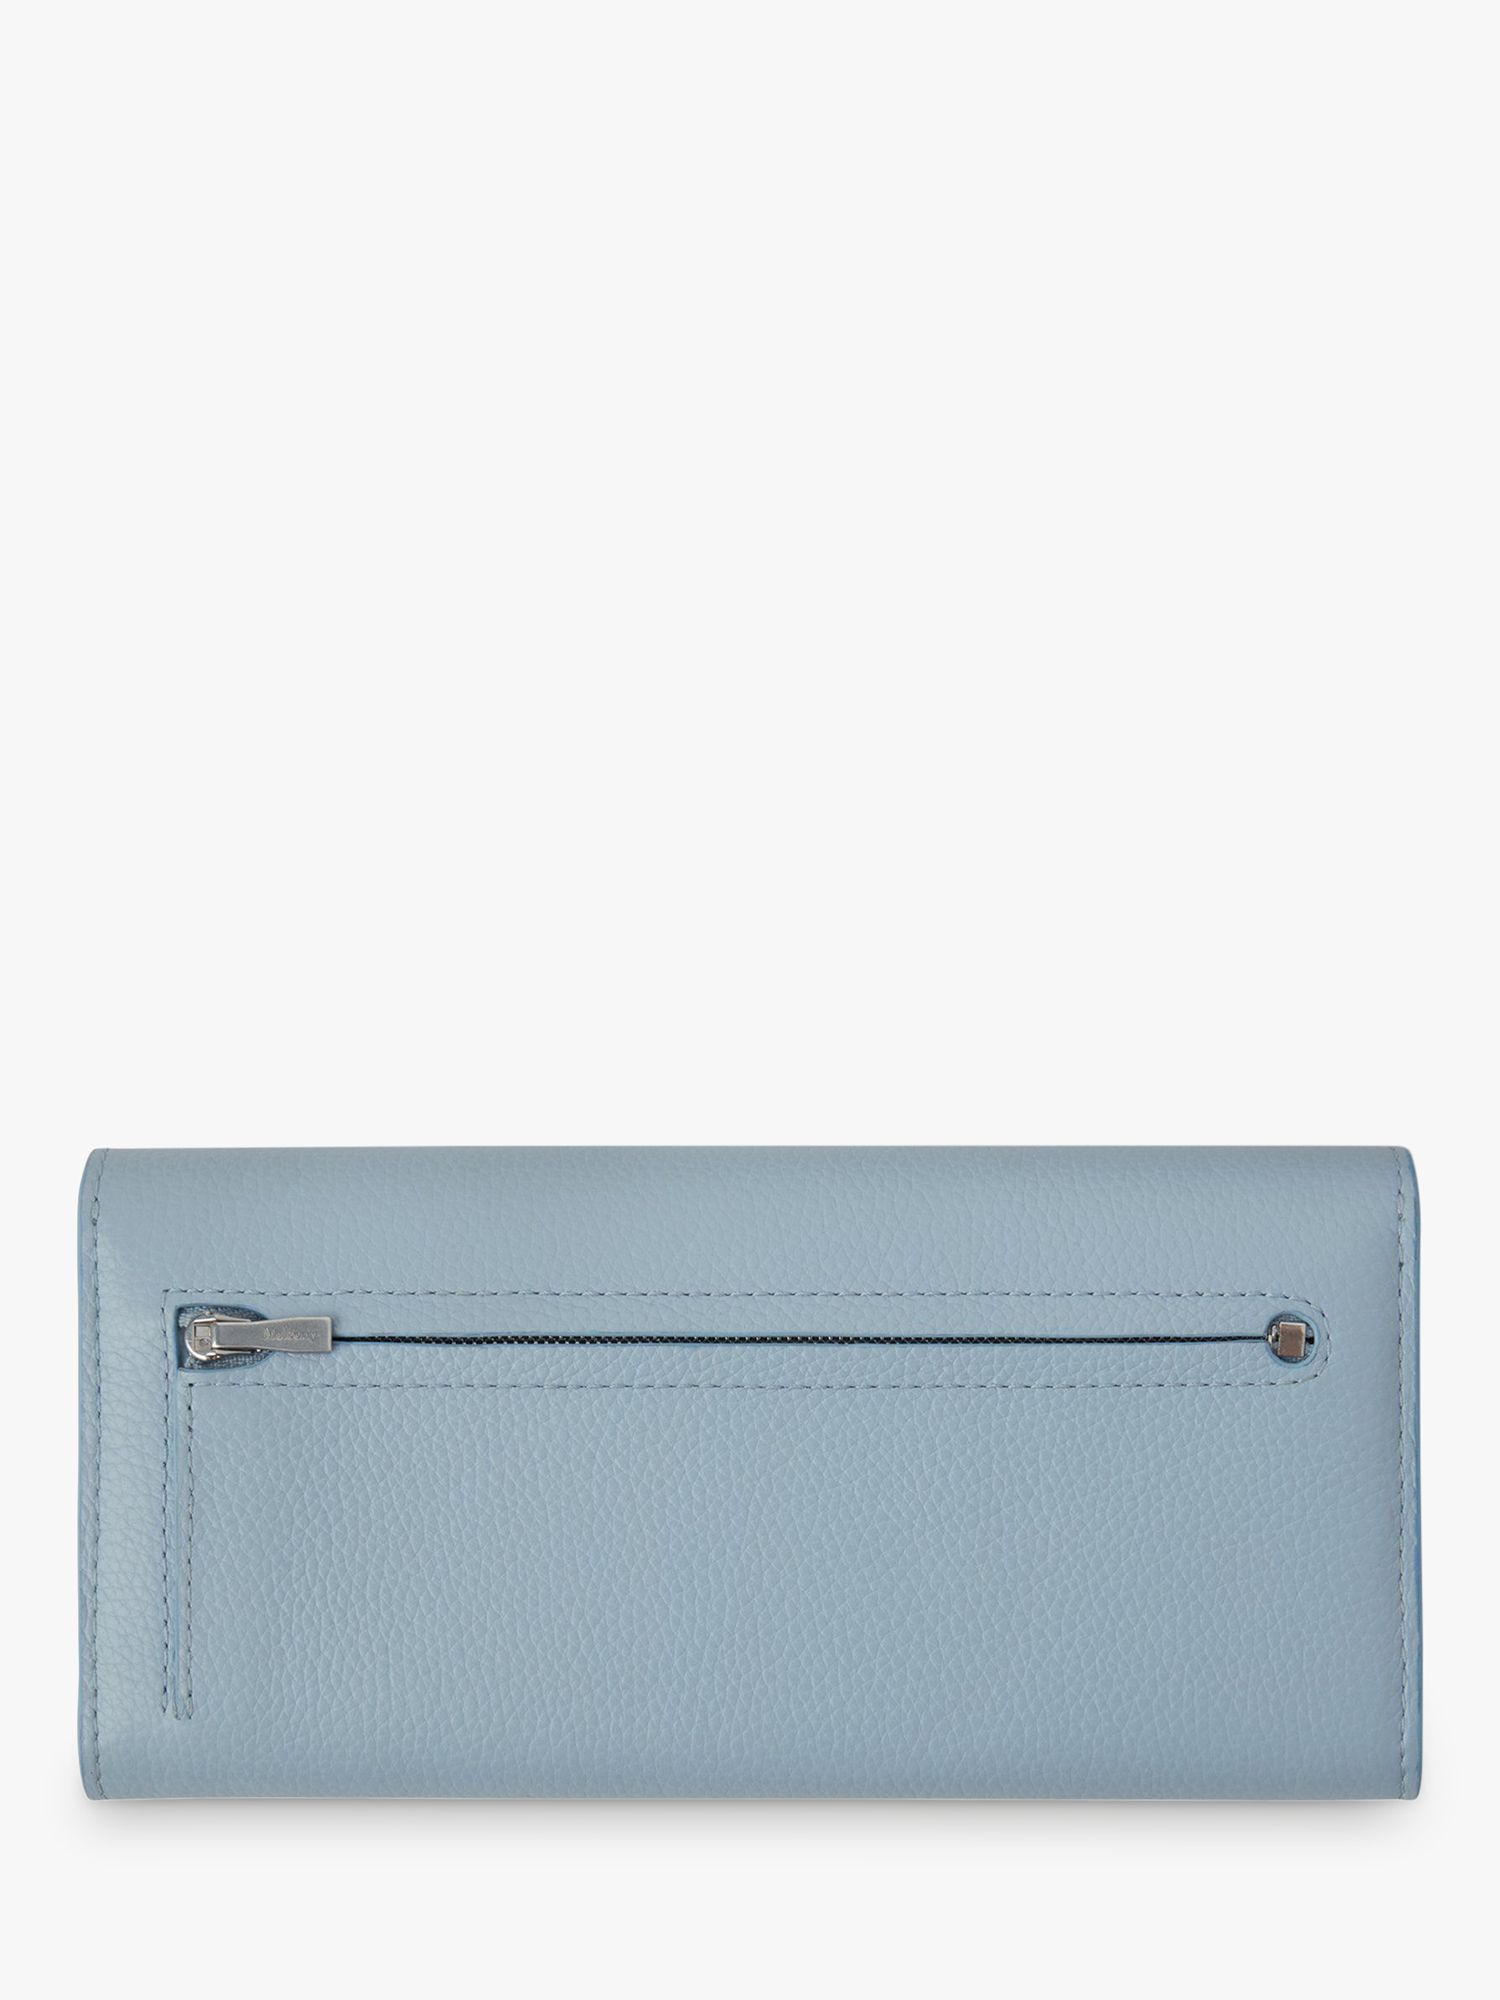 Mulberry Small Classic Grain Leather Continental Wallet